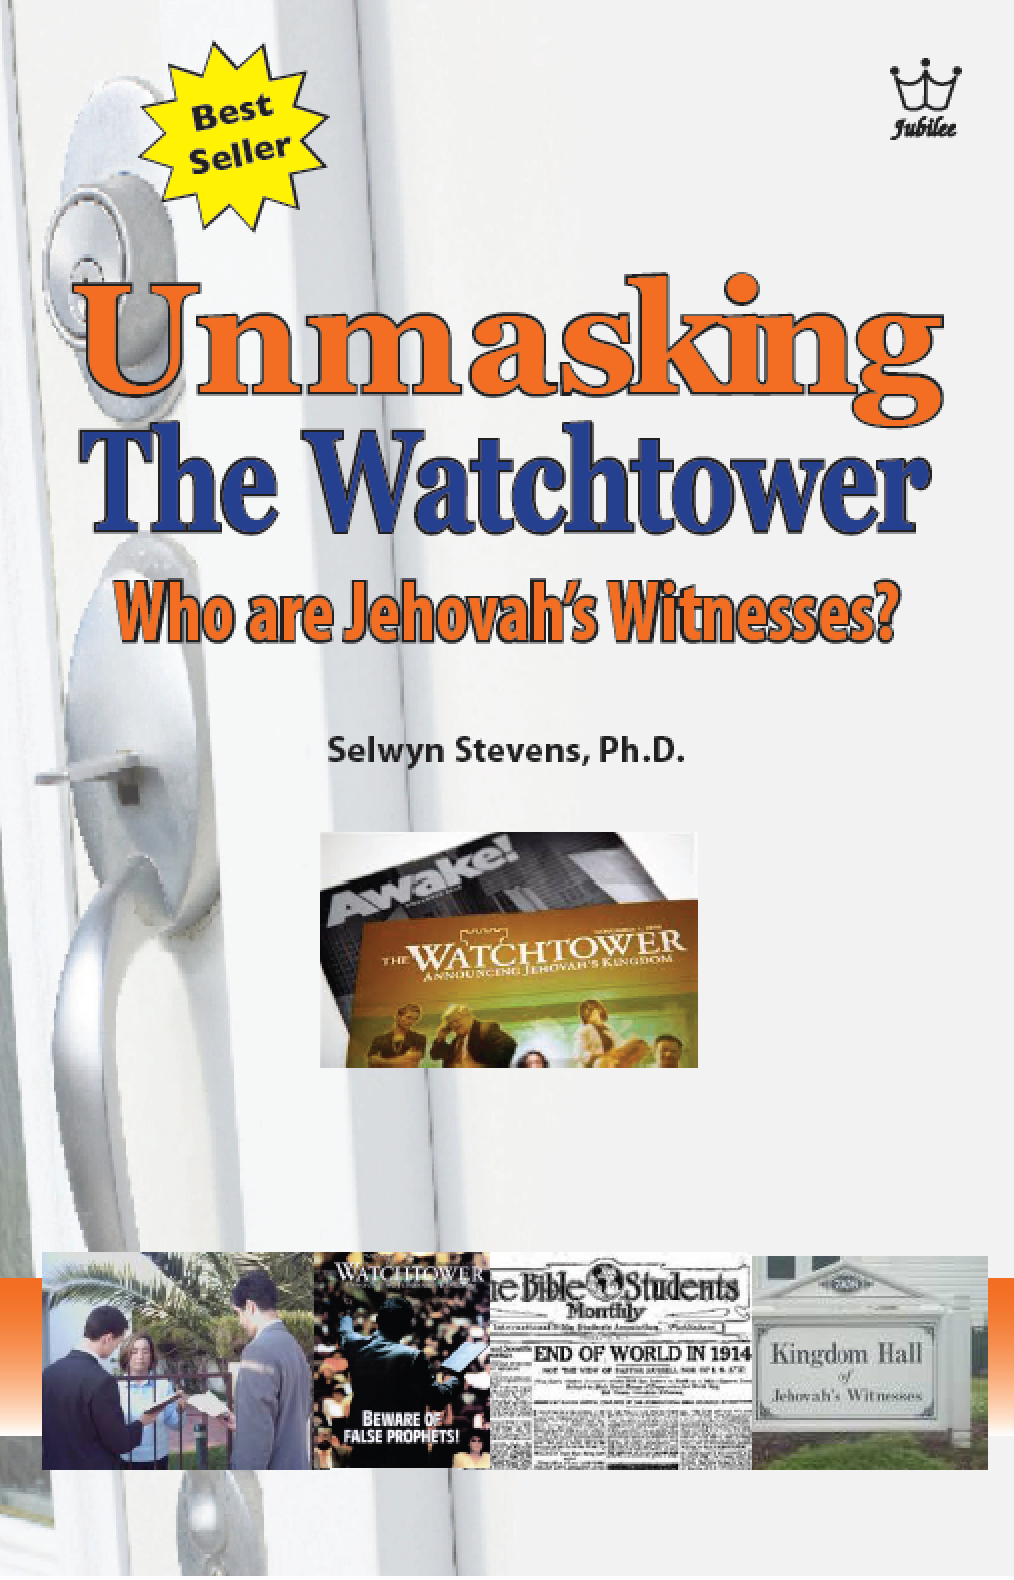 Unmasking the Watchtower  - Who are the Jehovah’s Witnesses?  MP4 Video on USB